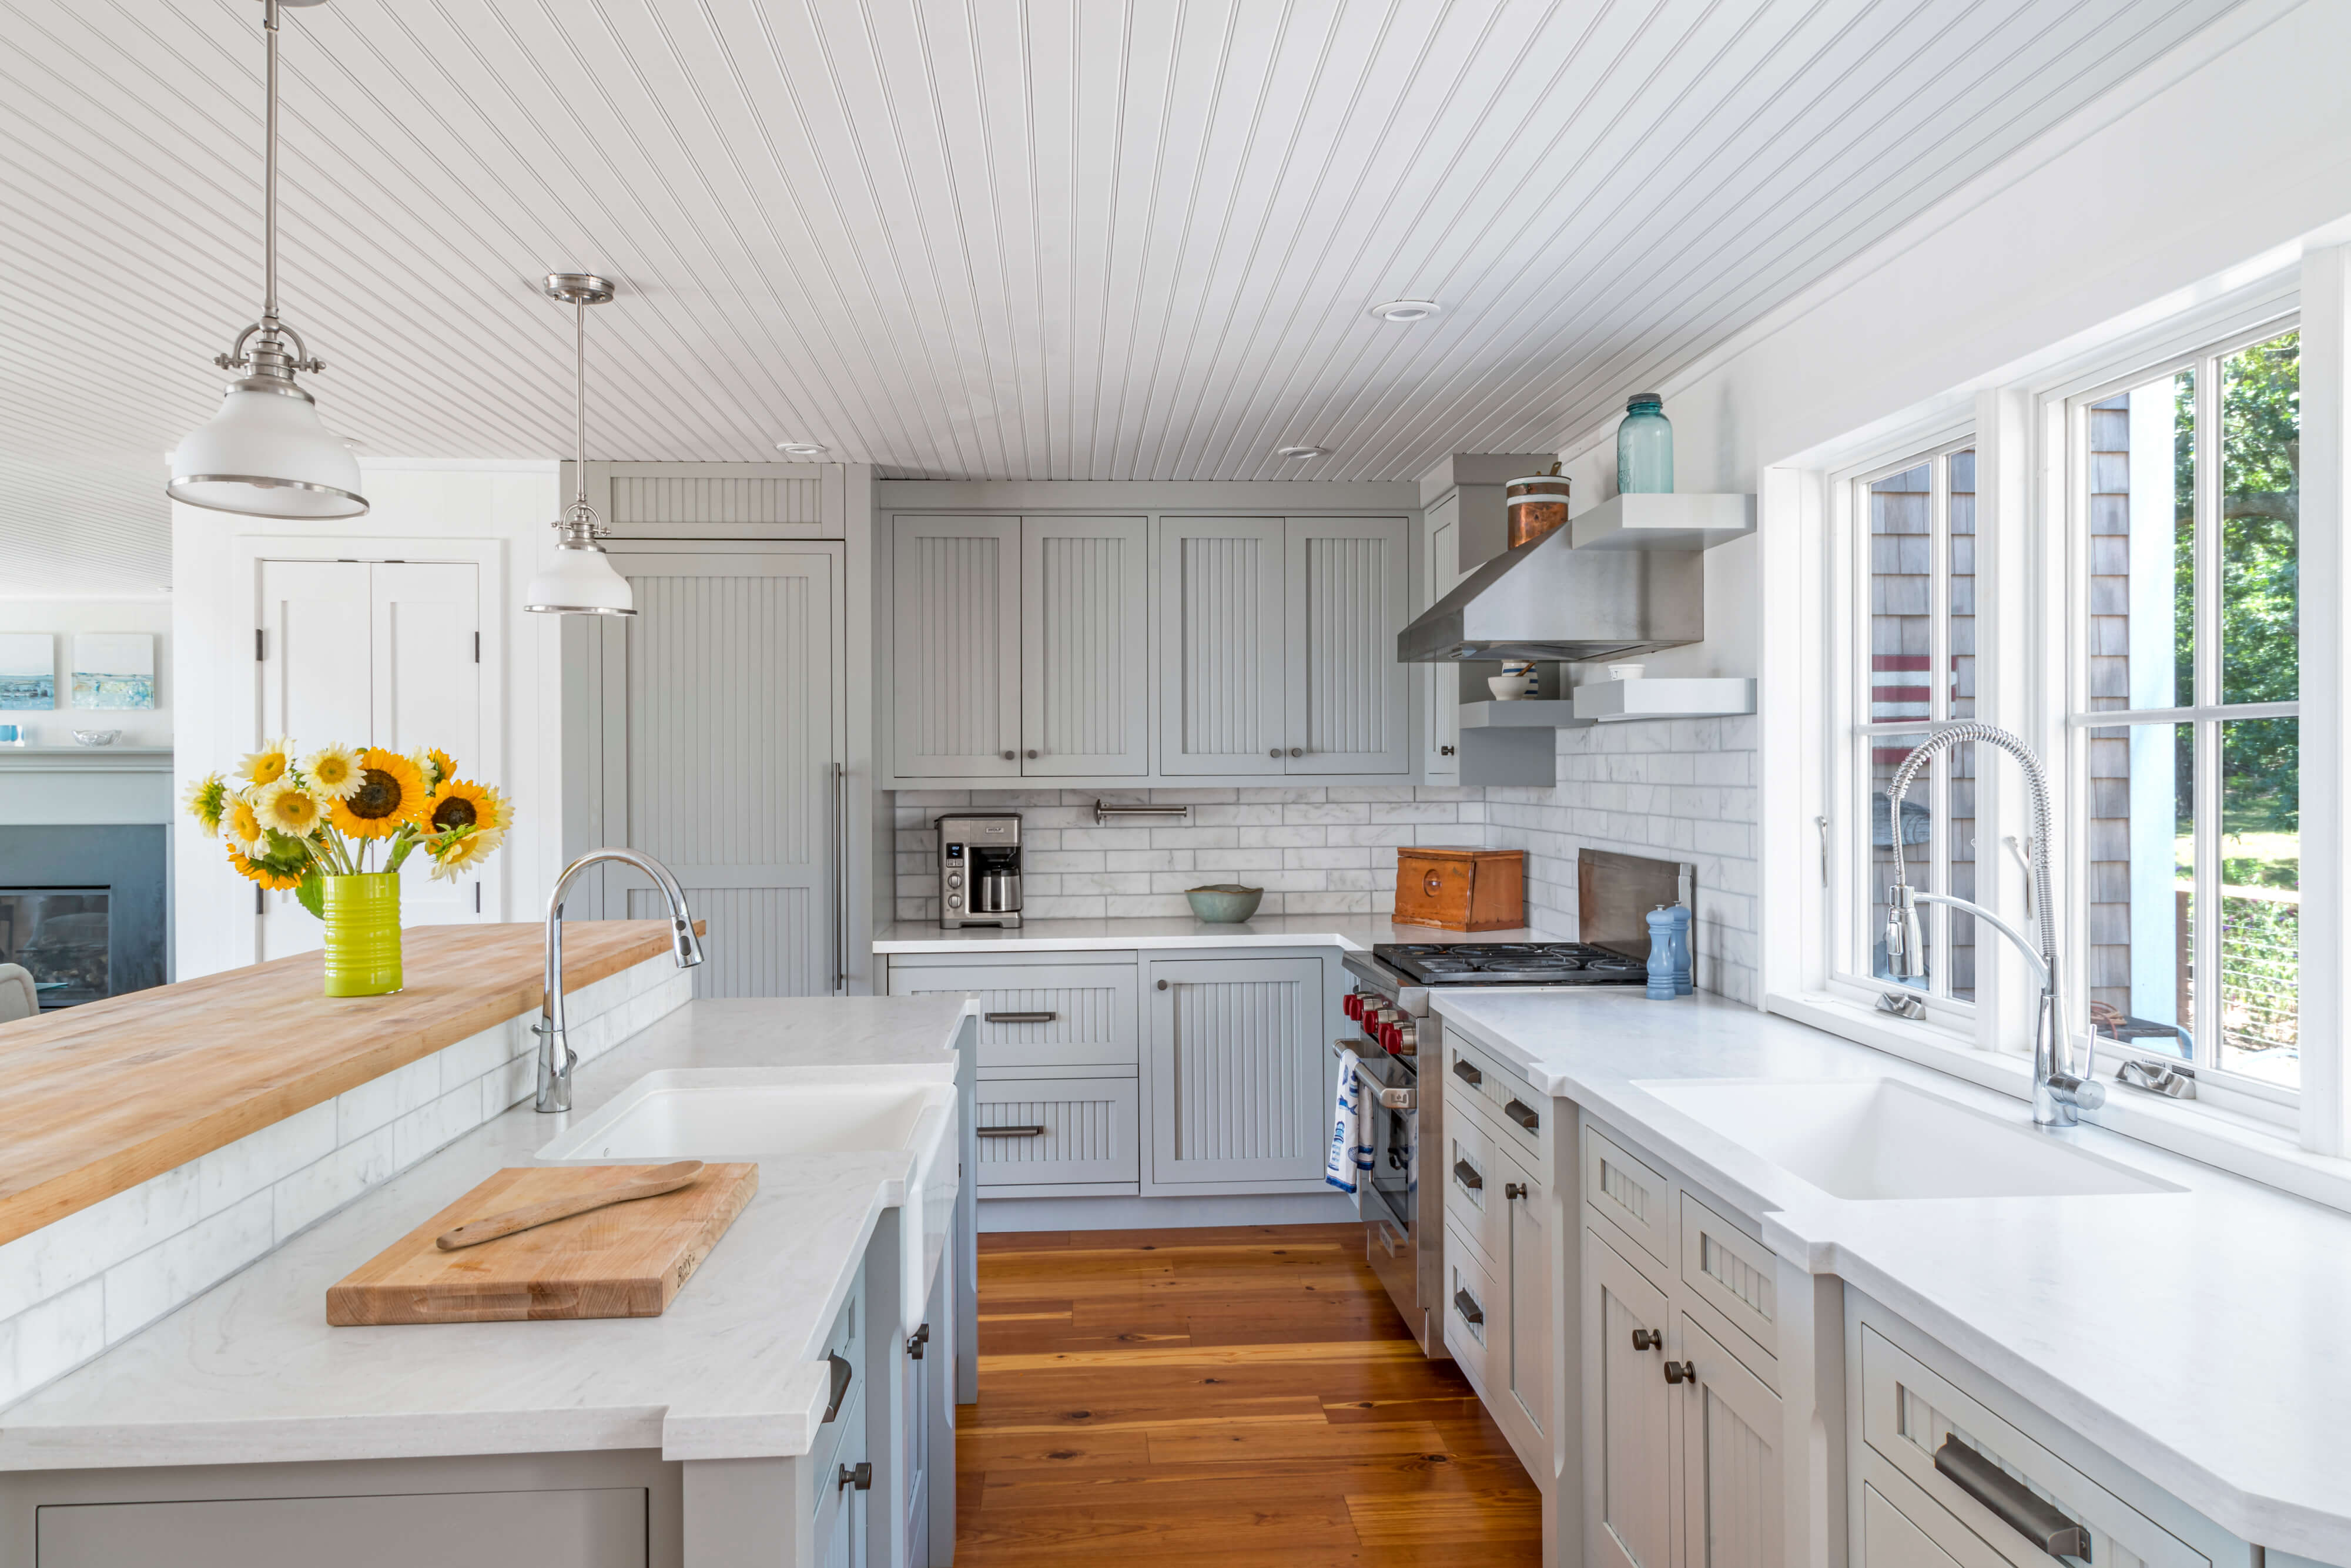 A delightful gray kitchen with cottage styled cabinet doors and a shiplap ceiling.